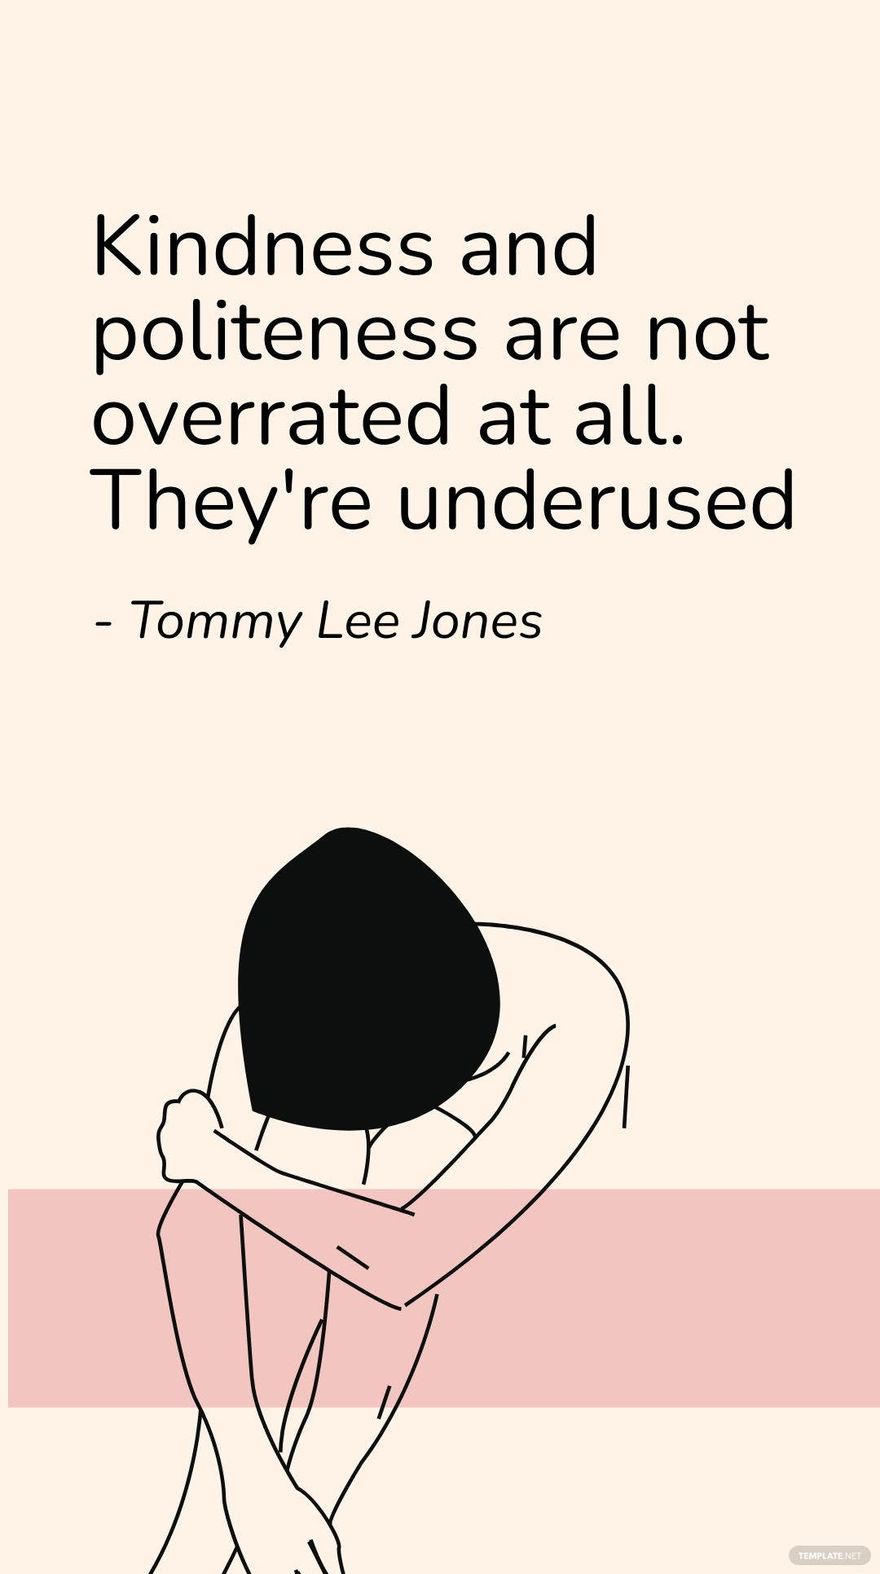 Tommy Lee Jones - Kindness and politeness are not overrated at all. They're underused